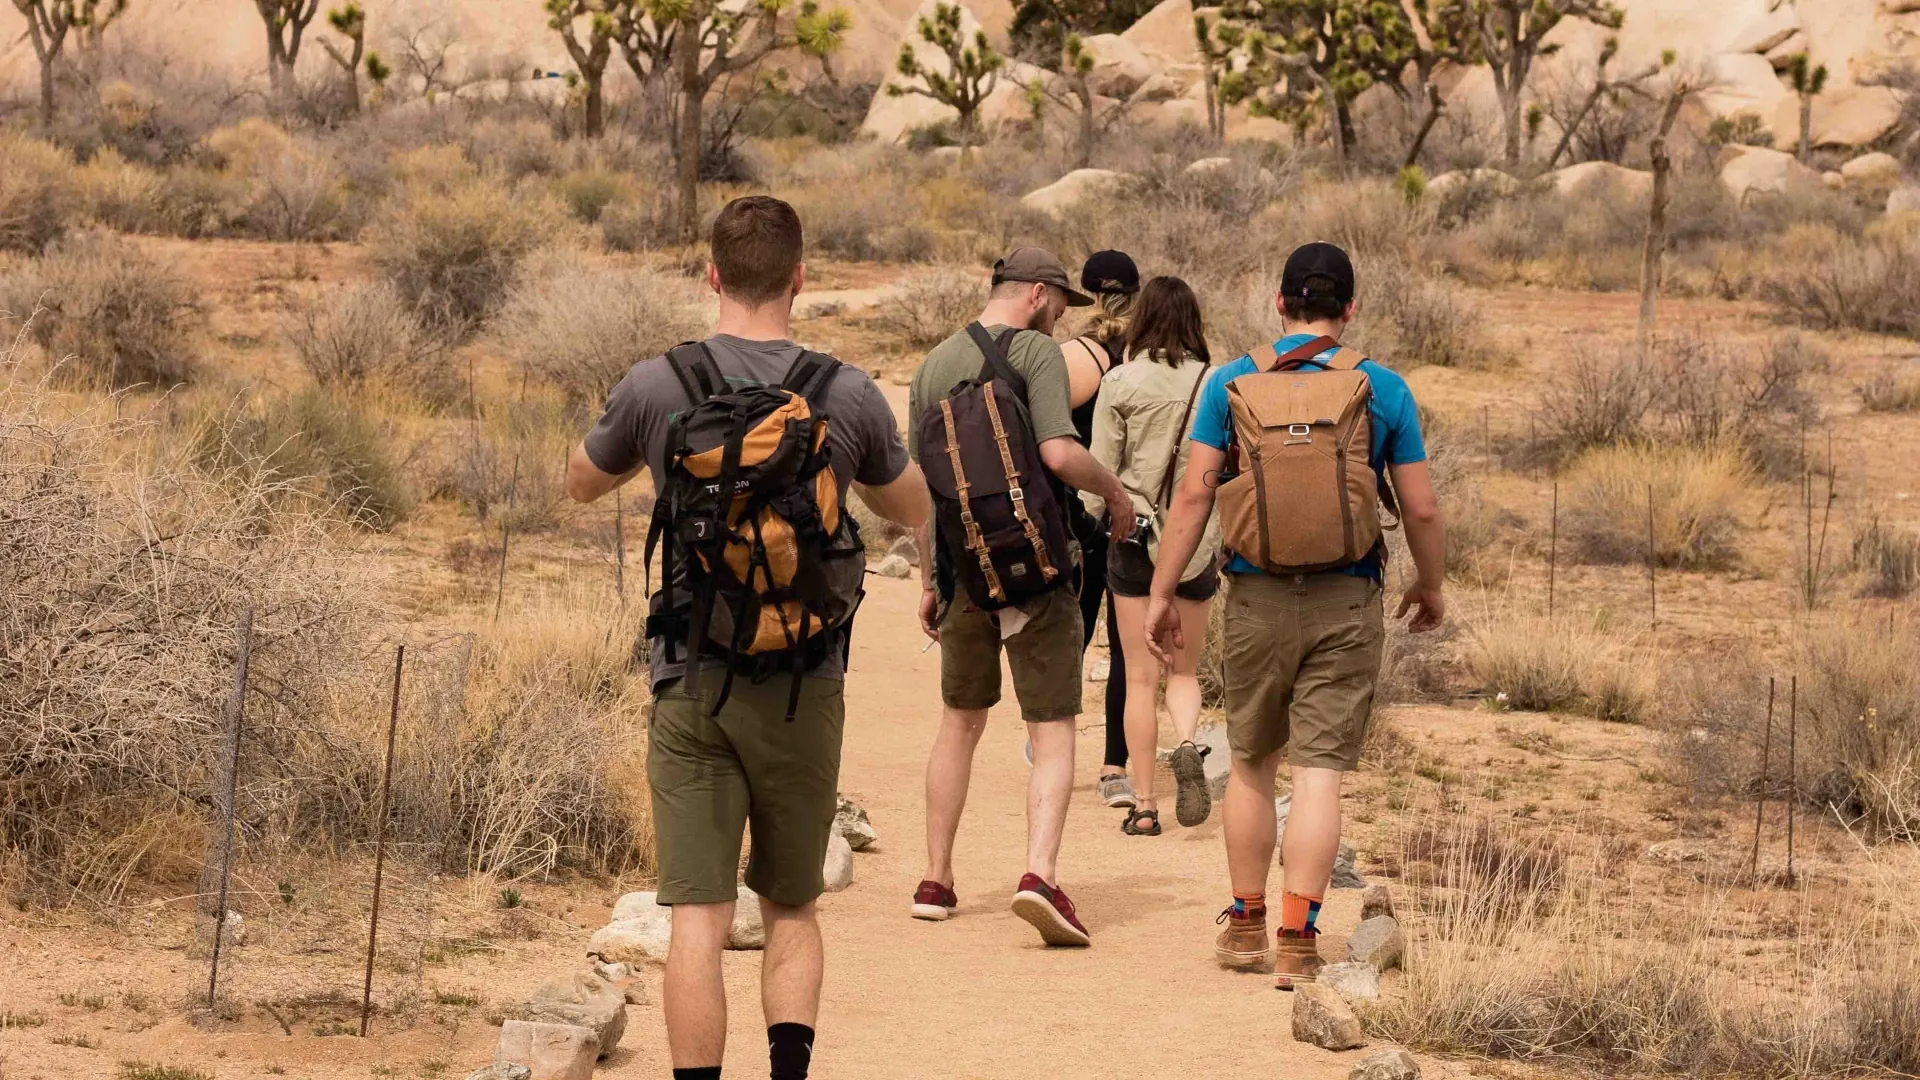 A bunch of friends with a mixture of different backpacks in search of adventure.